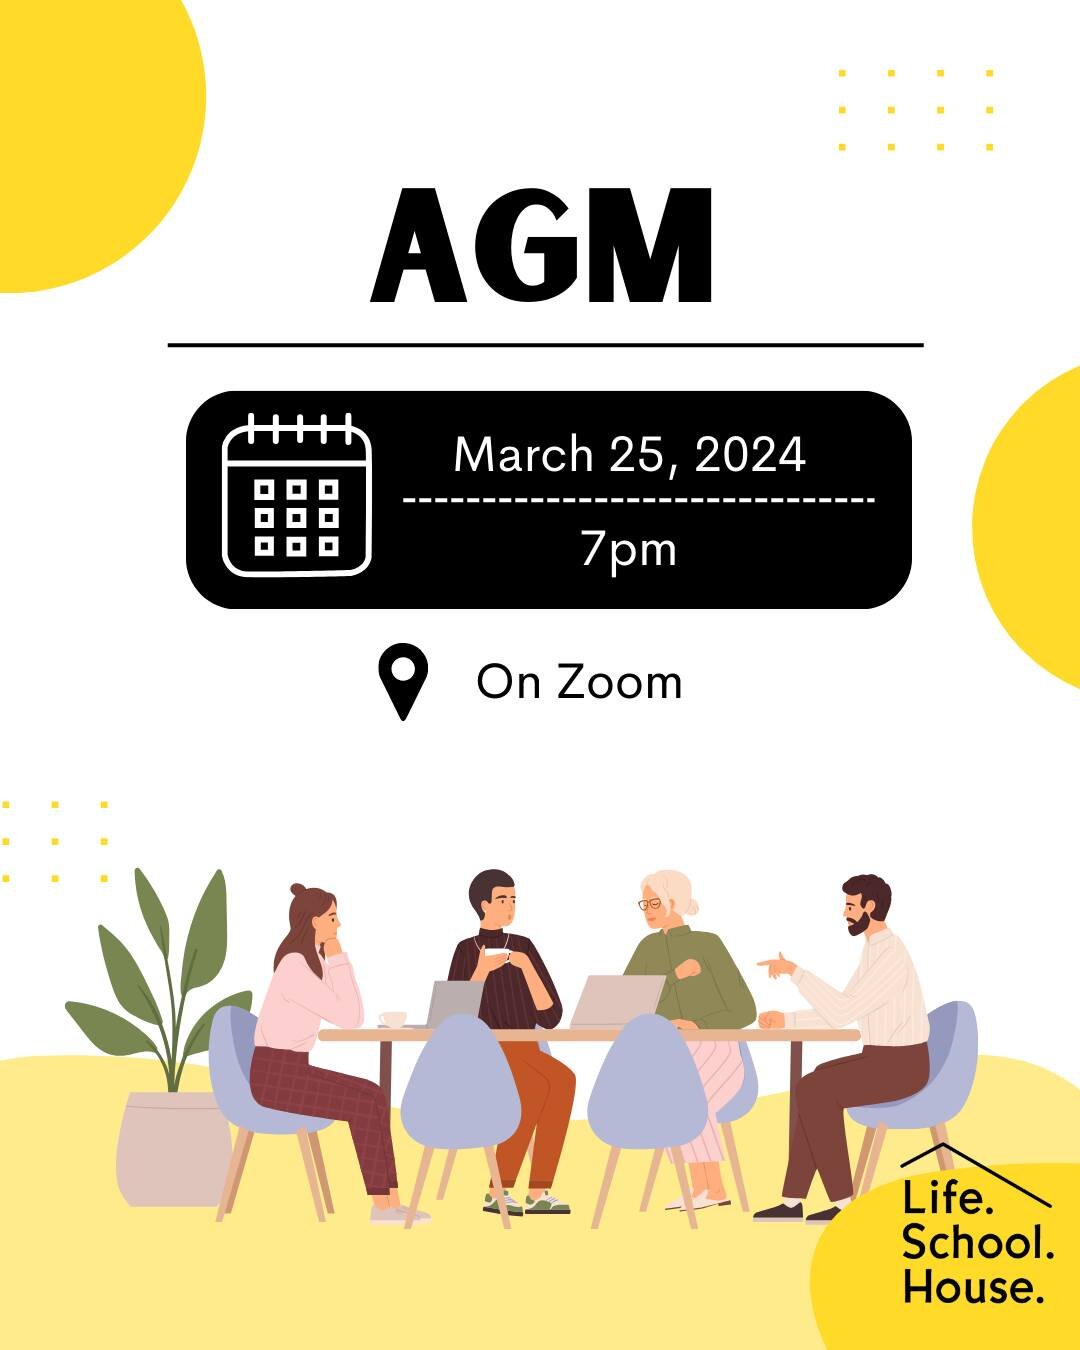 🚨 Our AGM is TONIGHT! 🚨

Let's shape the future of LifeSchoolHouse together. 🤝 

On Zoom at 7pm
Meeting ID: 899 3629 1962

See you there! ✨